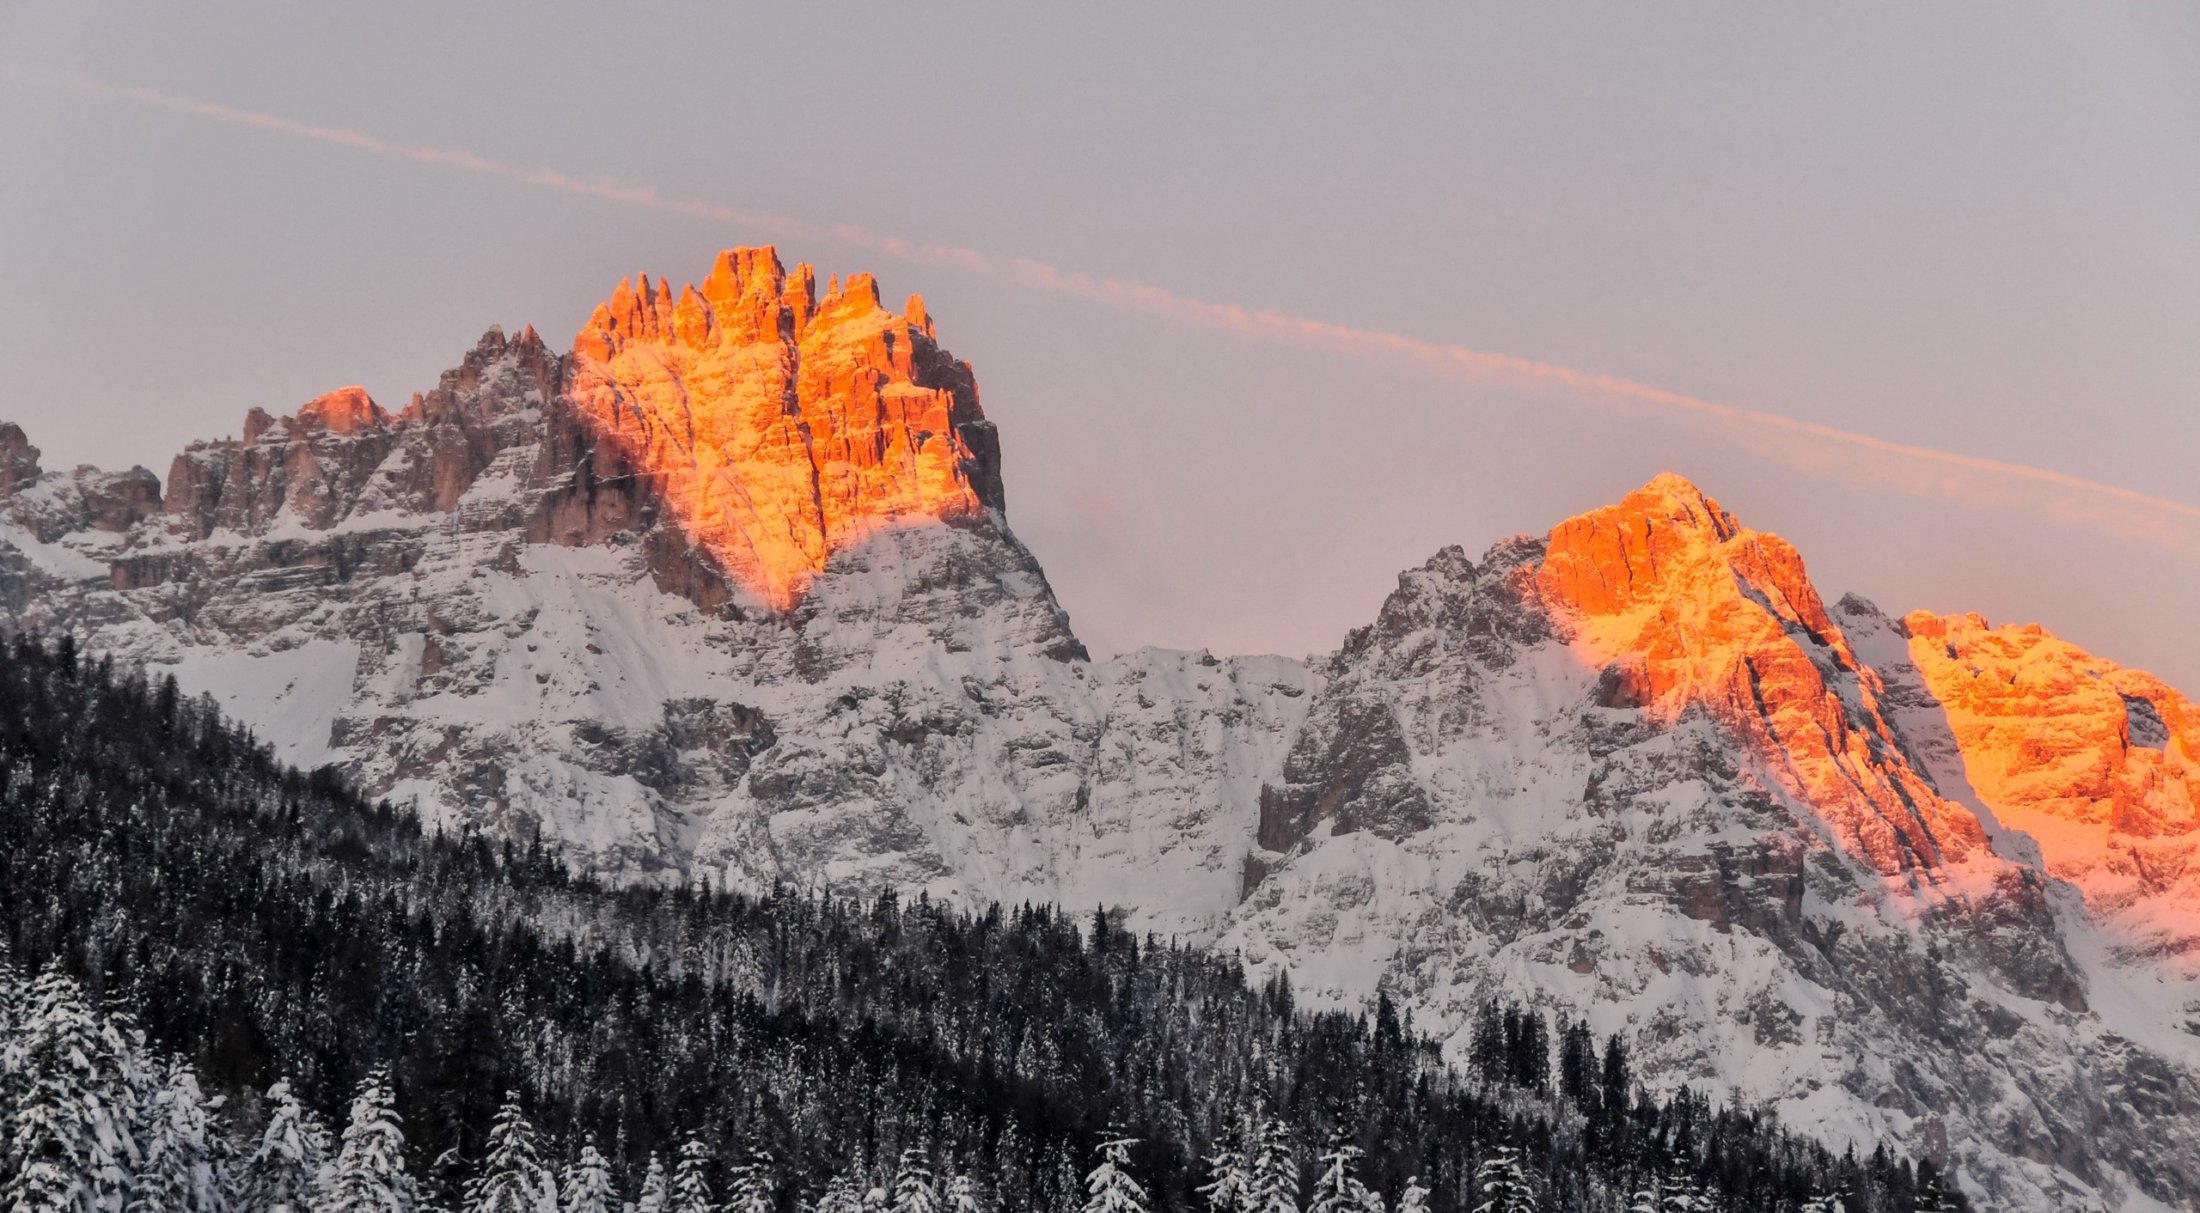 Morning glow in the Dolomites